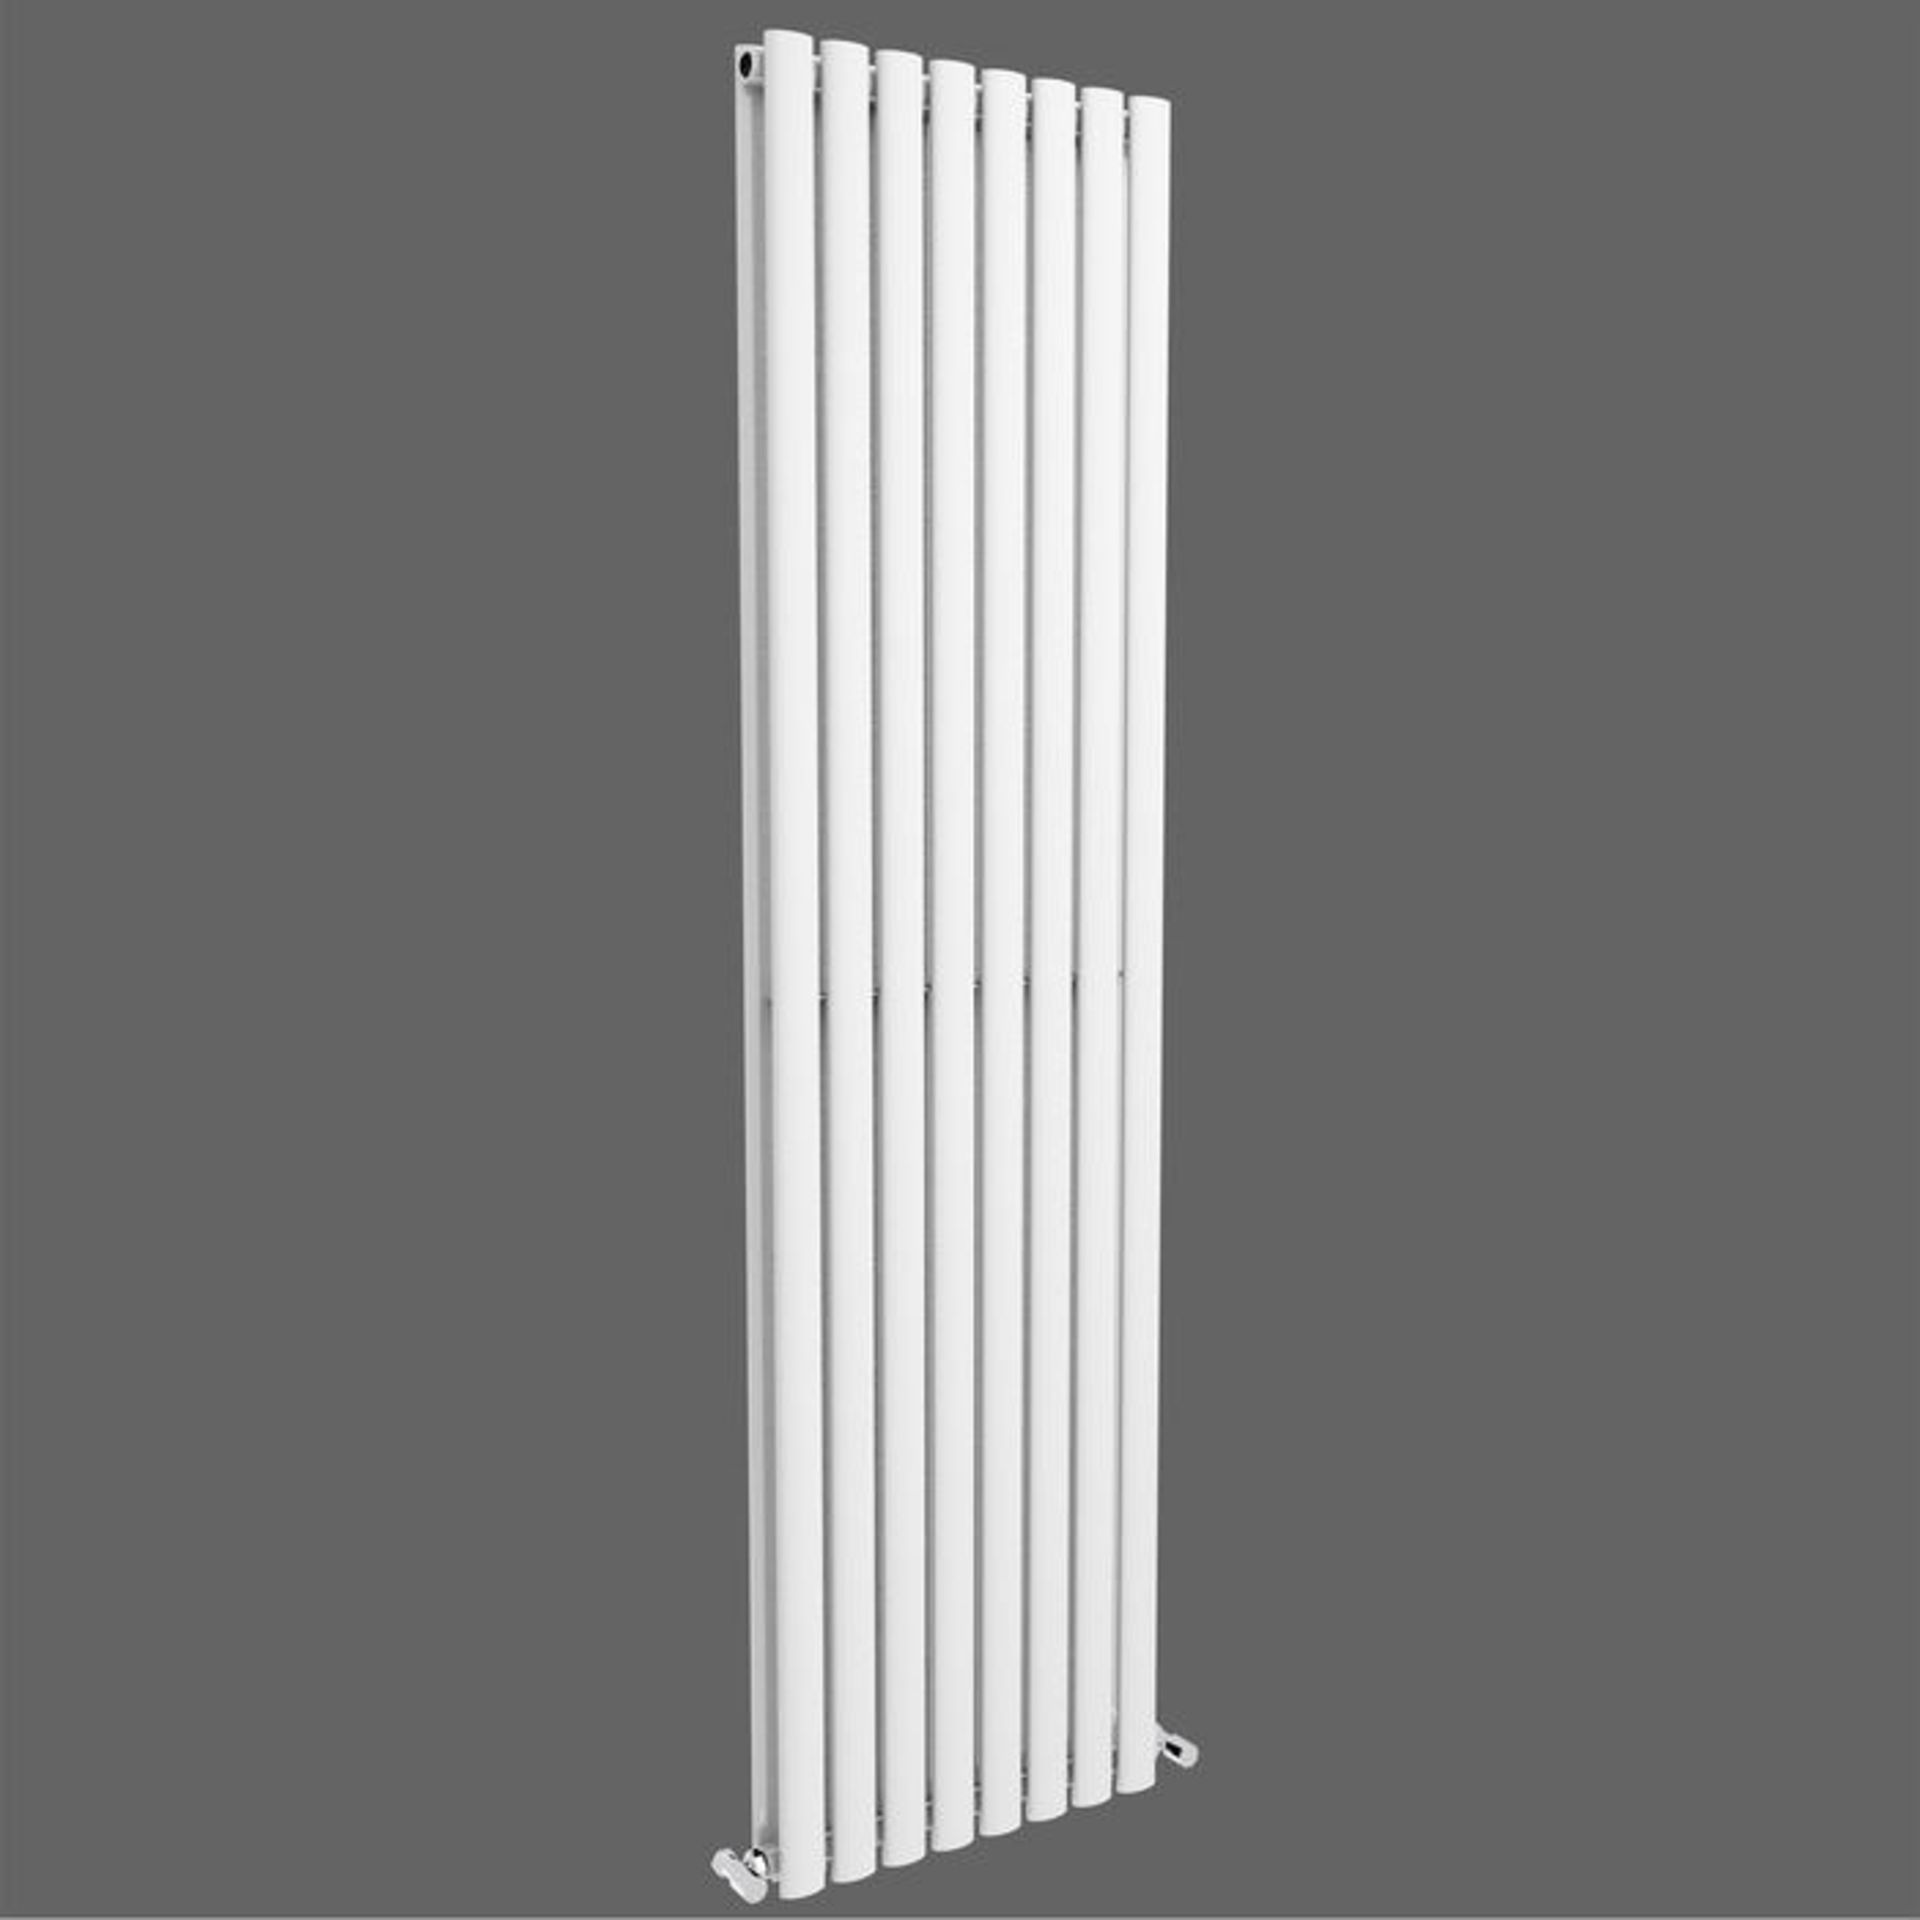 1800x480mm Gloss White Double Oval Tube Vertical Radiator.RRP £499.99.Made from high quality l... - Image 3 of 3